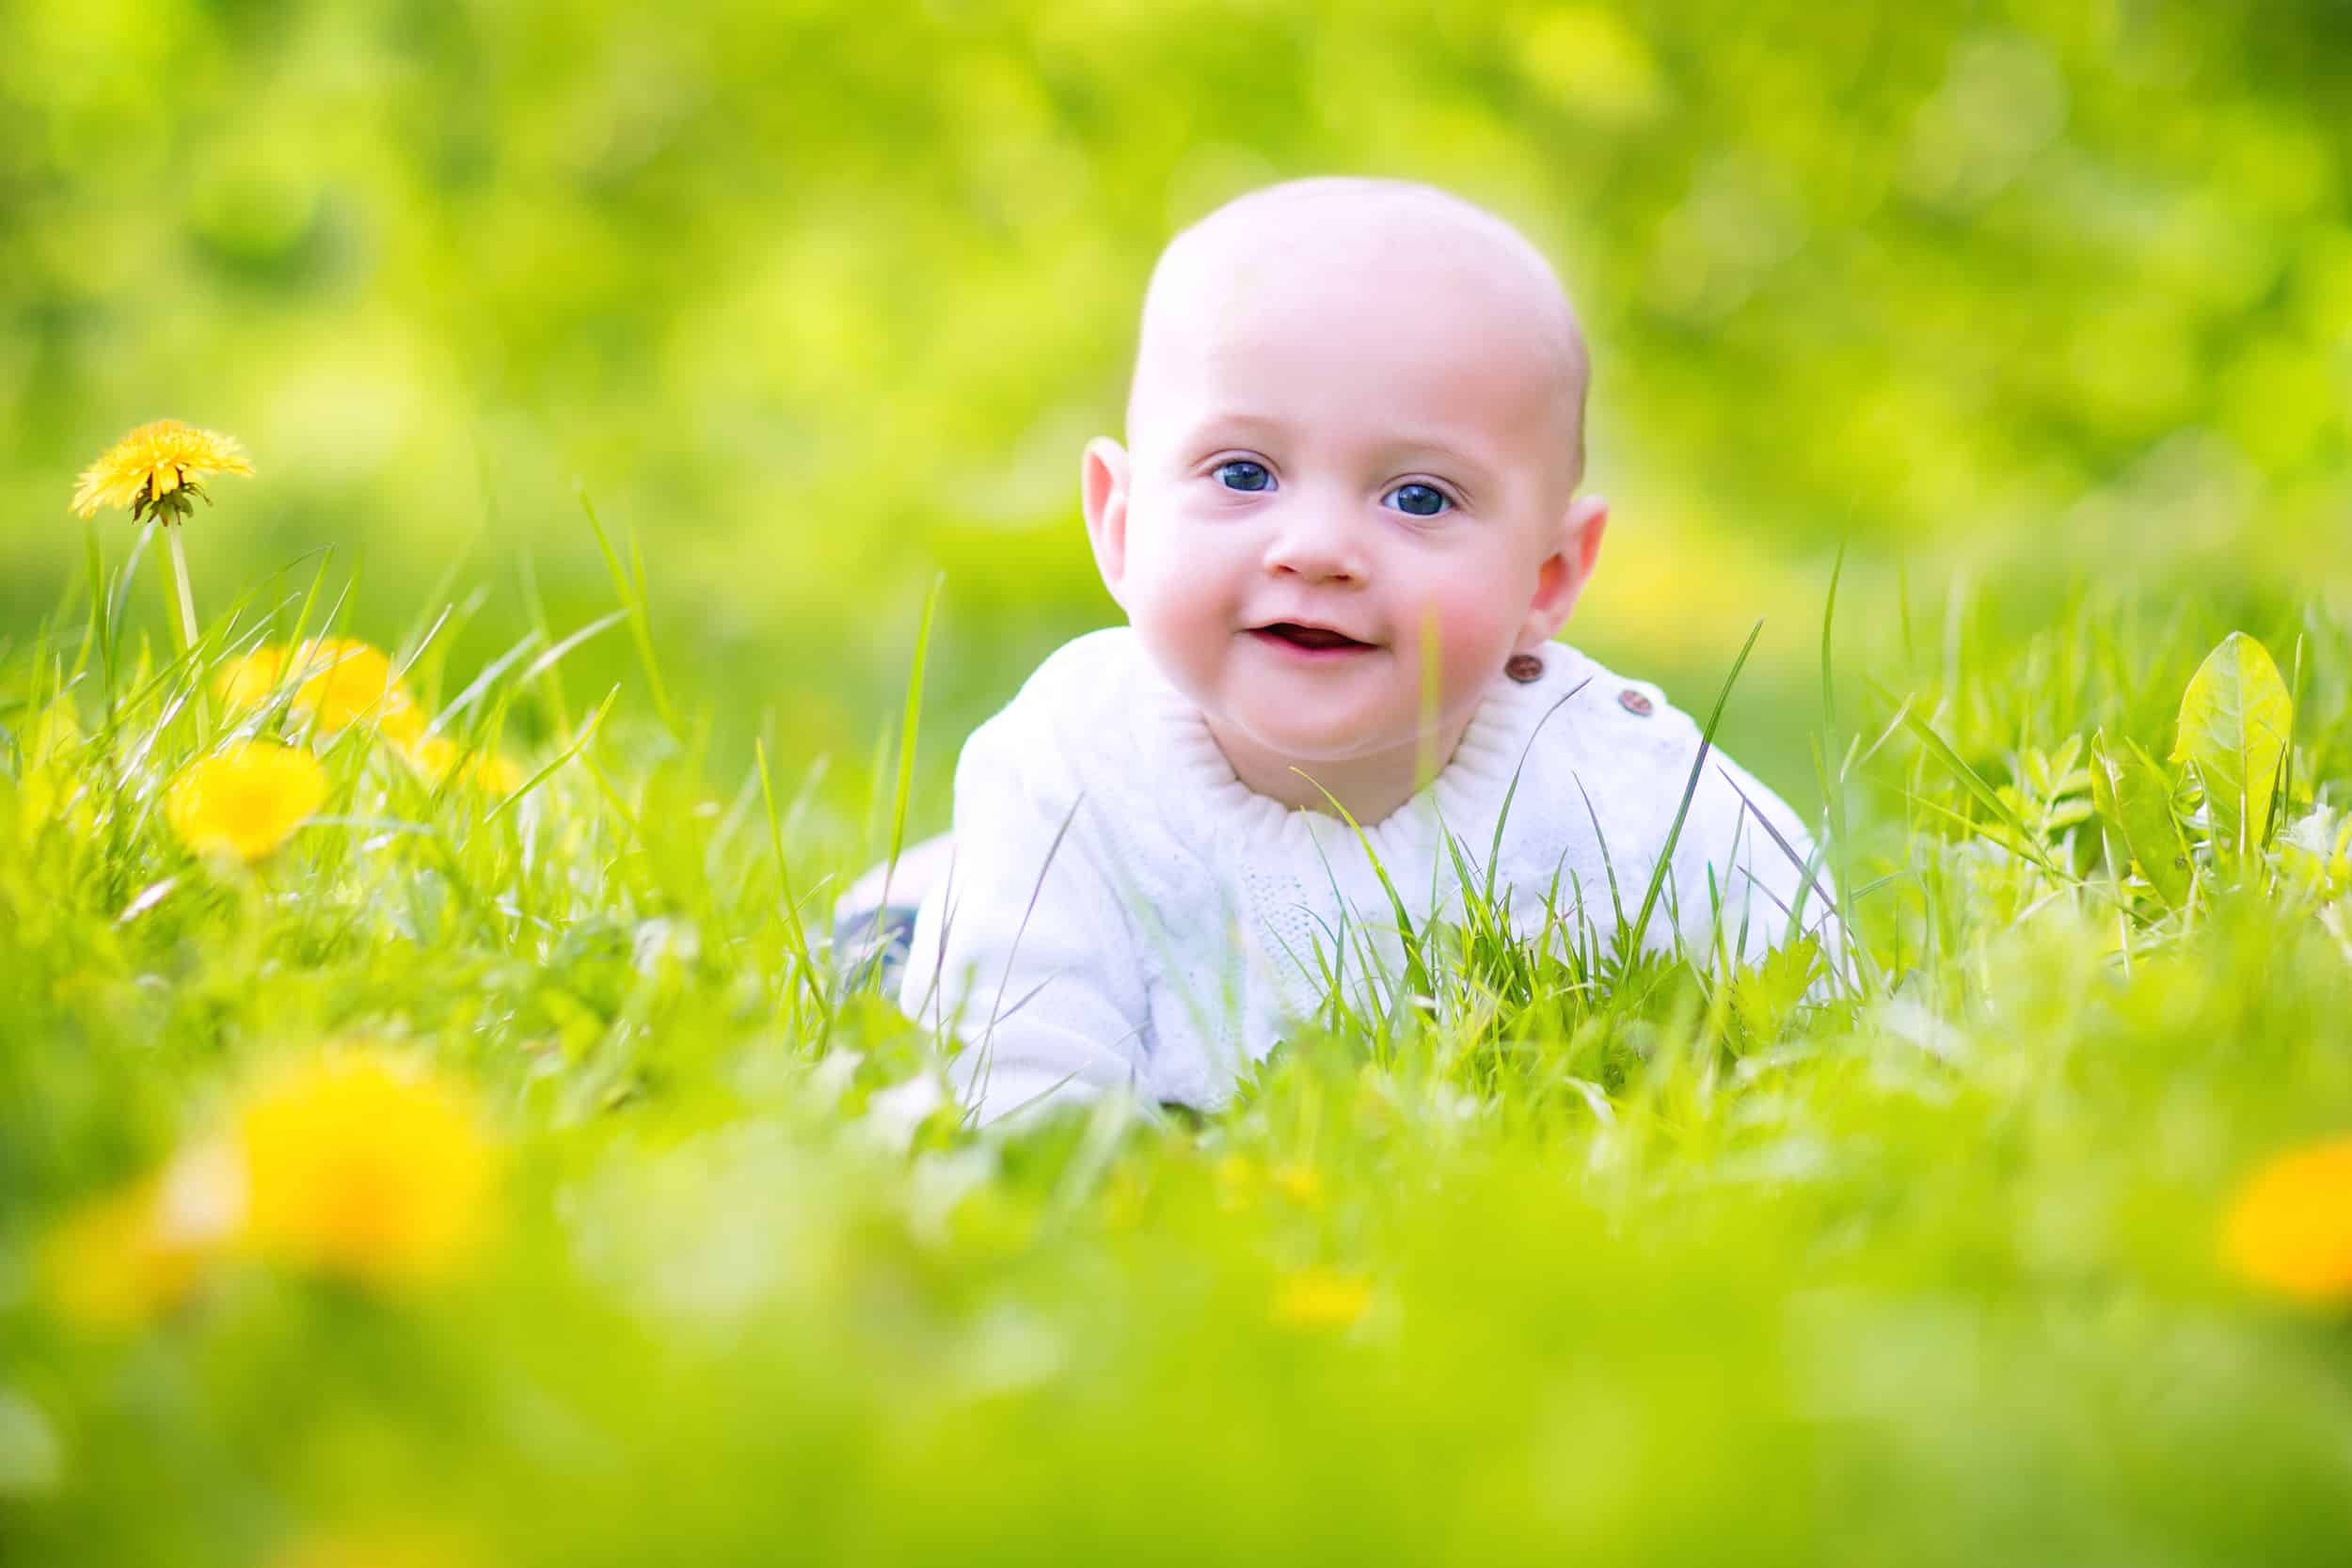 Adorable little happy smiling baby boy playing in a blooming apple garden between beautiful trees with white flowers on green grass with yellow dandelions on a sunny spring day